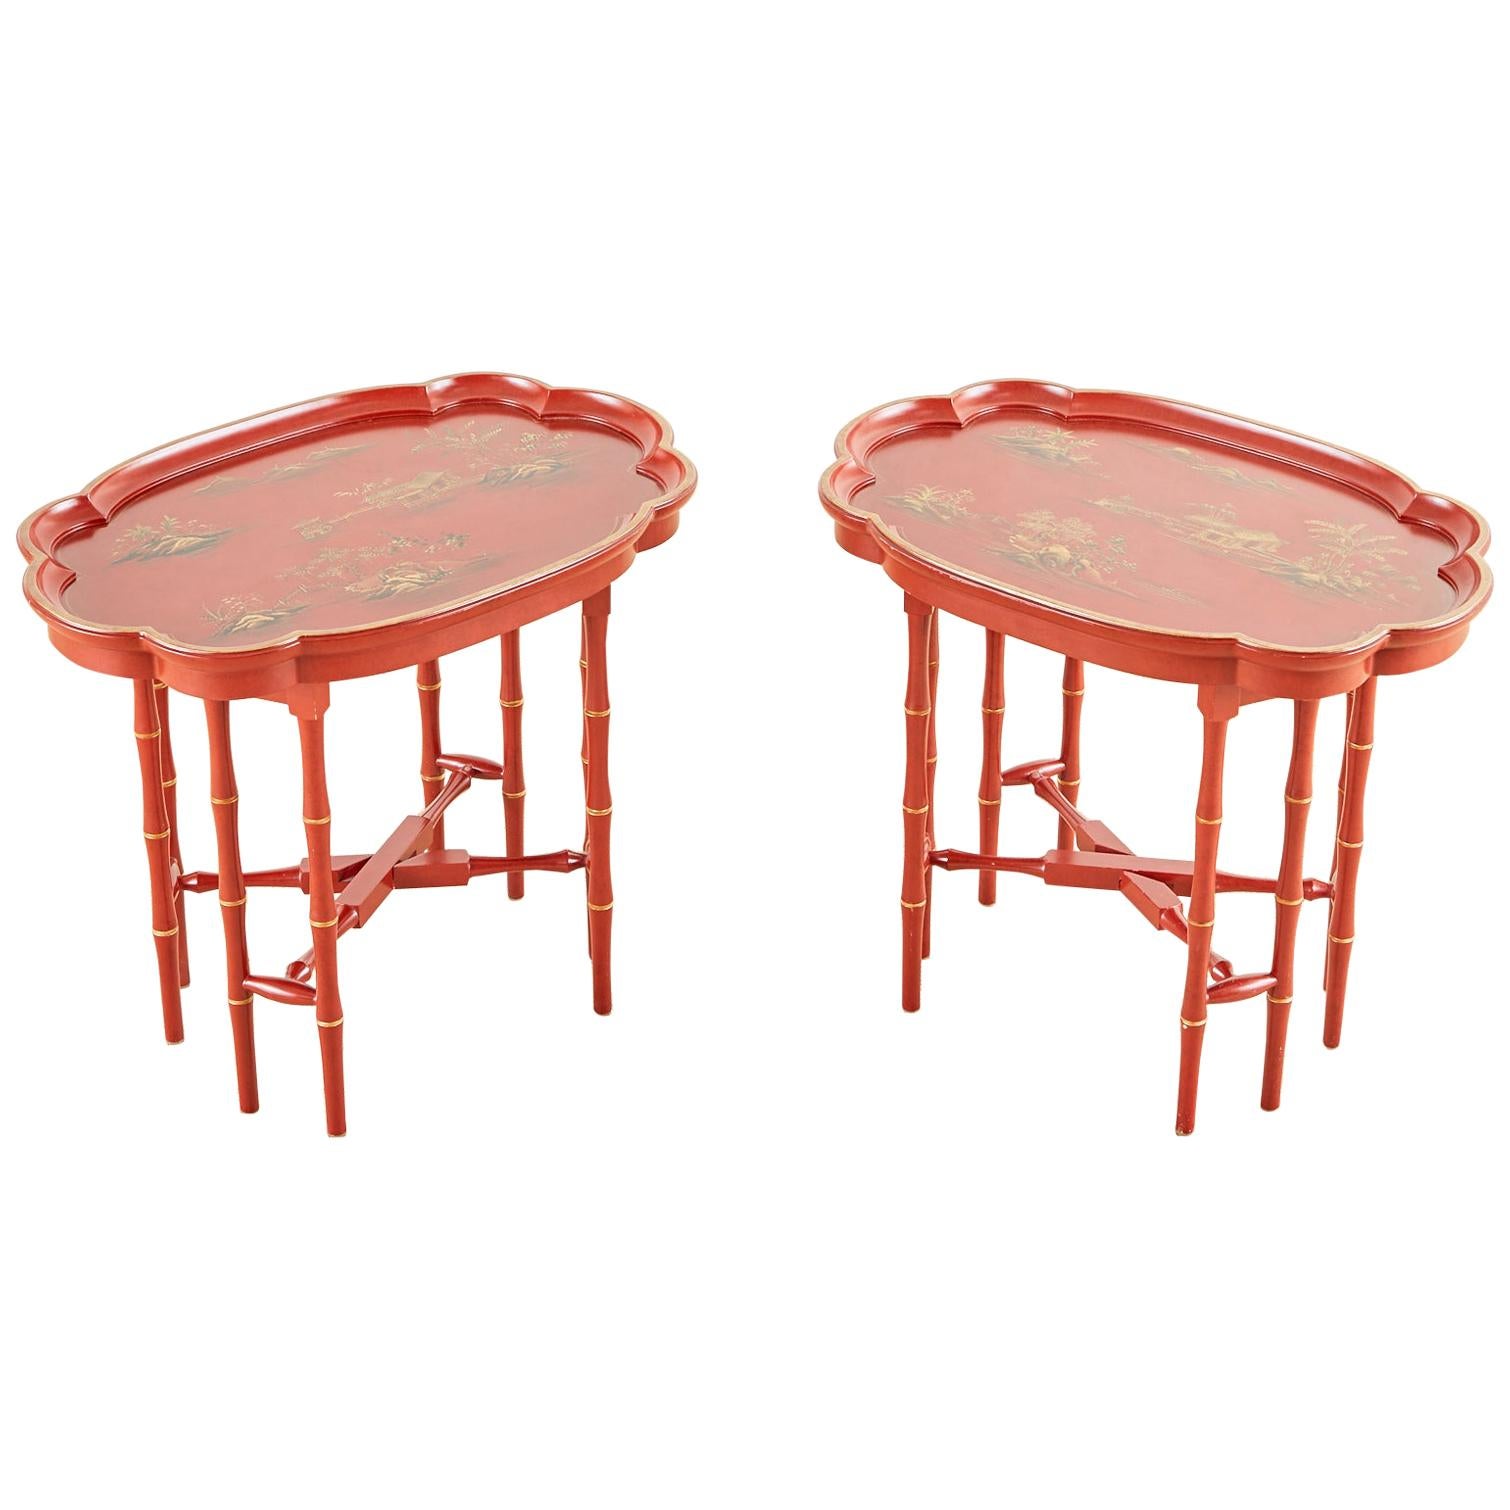 Pair of English Chinoiserie Style Faux Bamboo Tray Tables